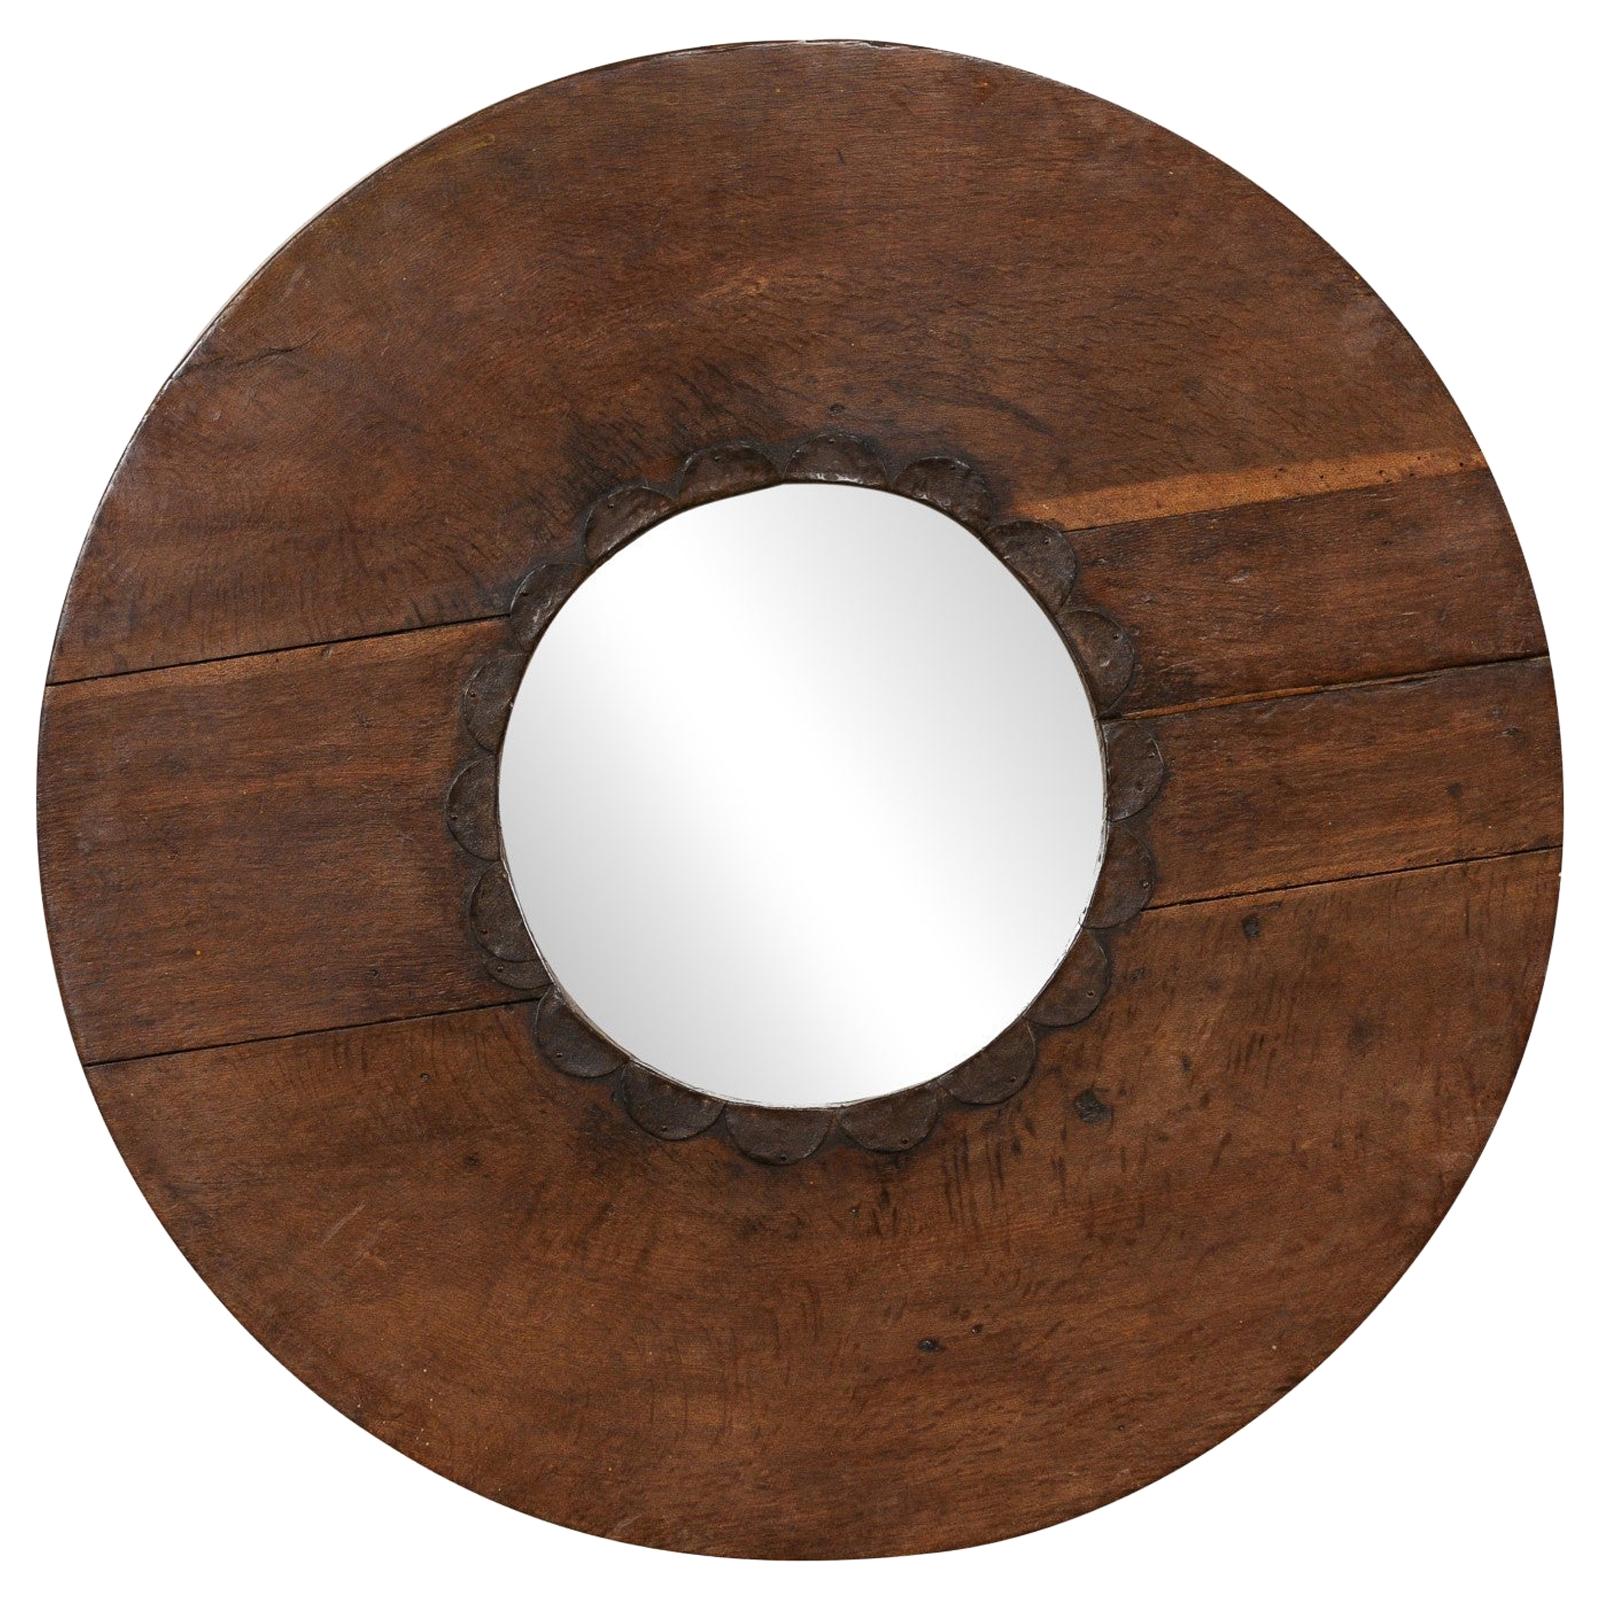 Unique Circular-Shaped Mirror from an Old Wooden N. African Cooking Utensil